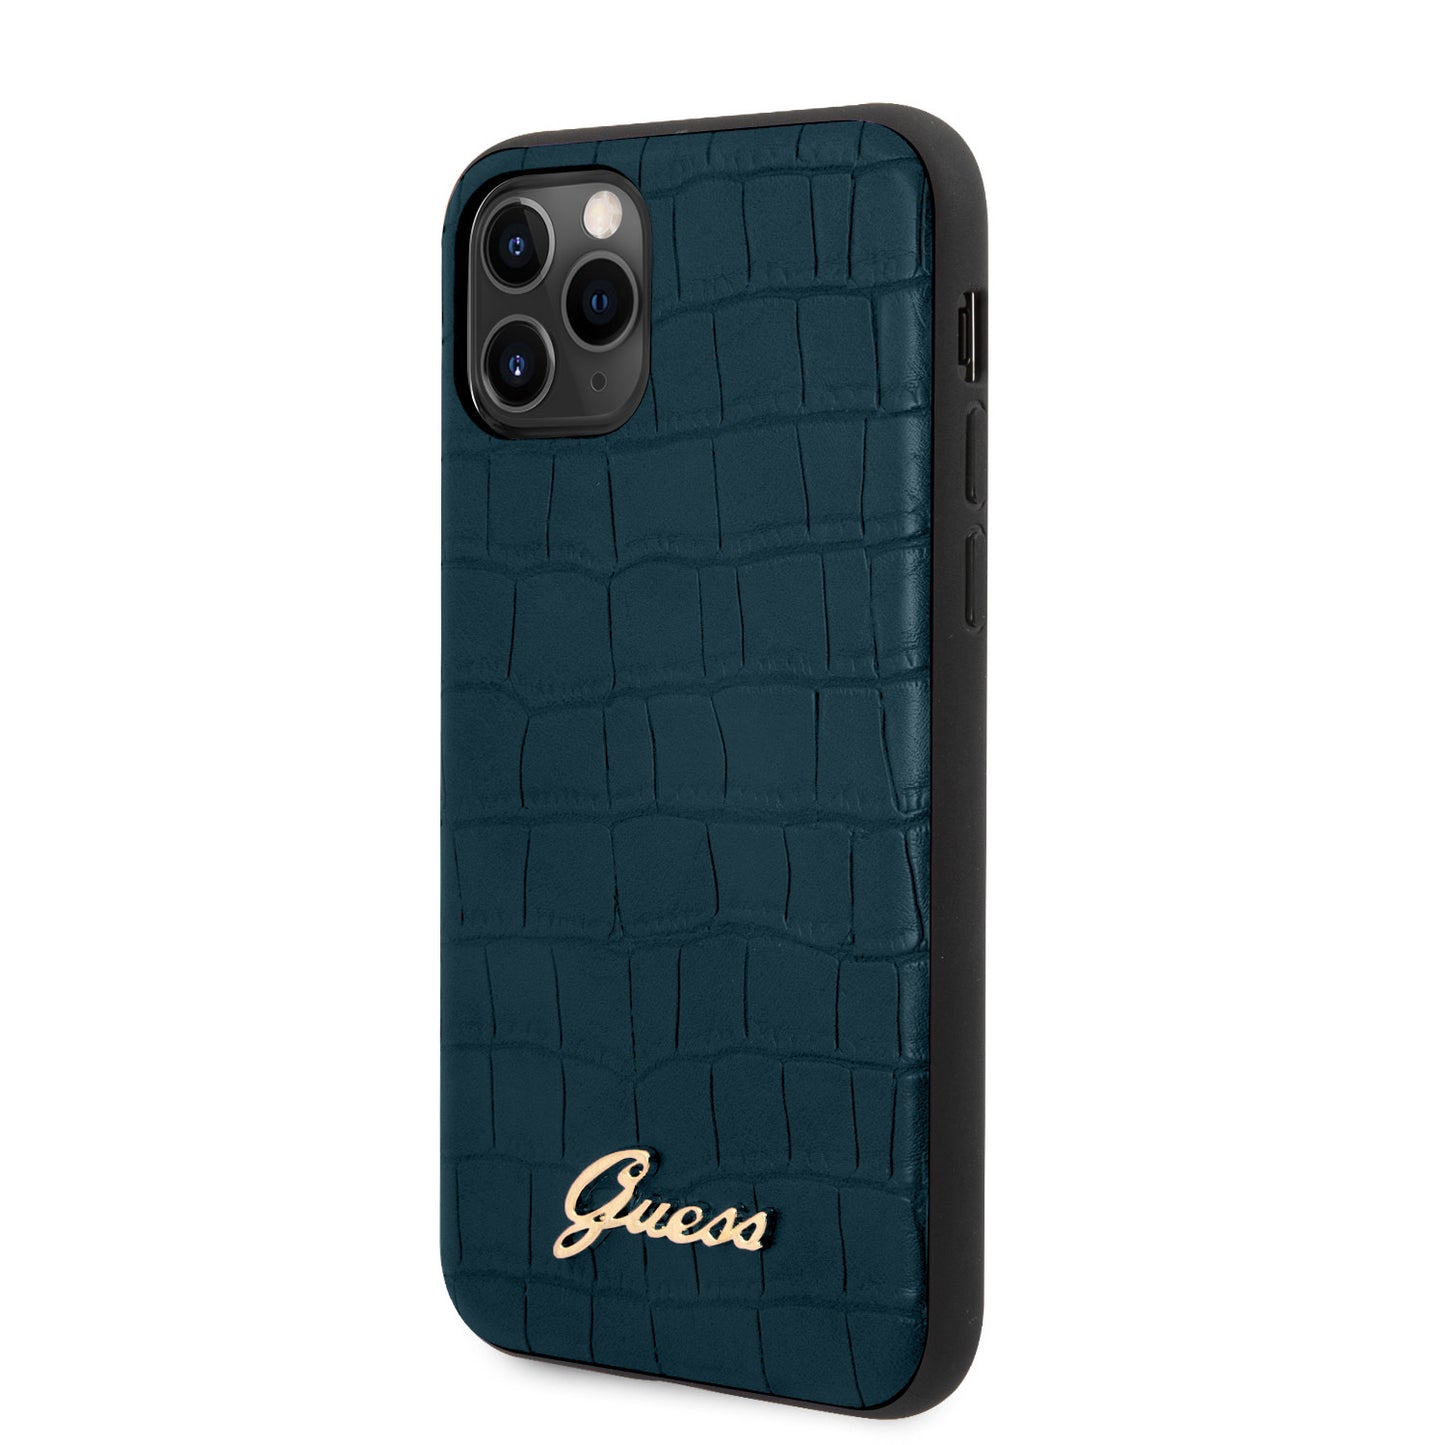 Guess iPhone 11 PRO Backcover - Croco Lines - Blauw